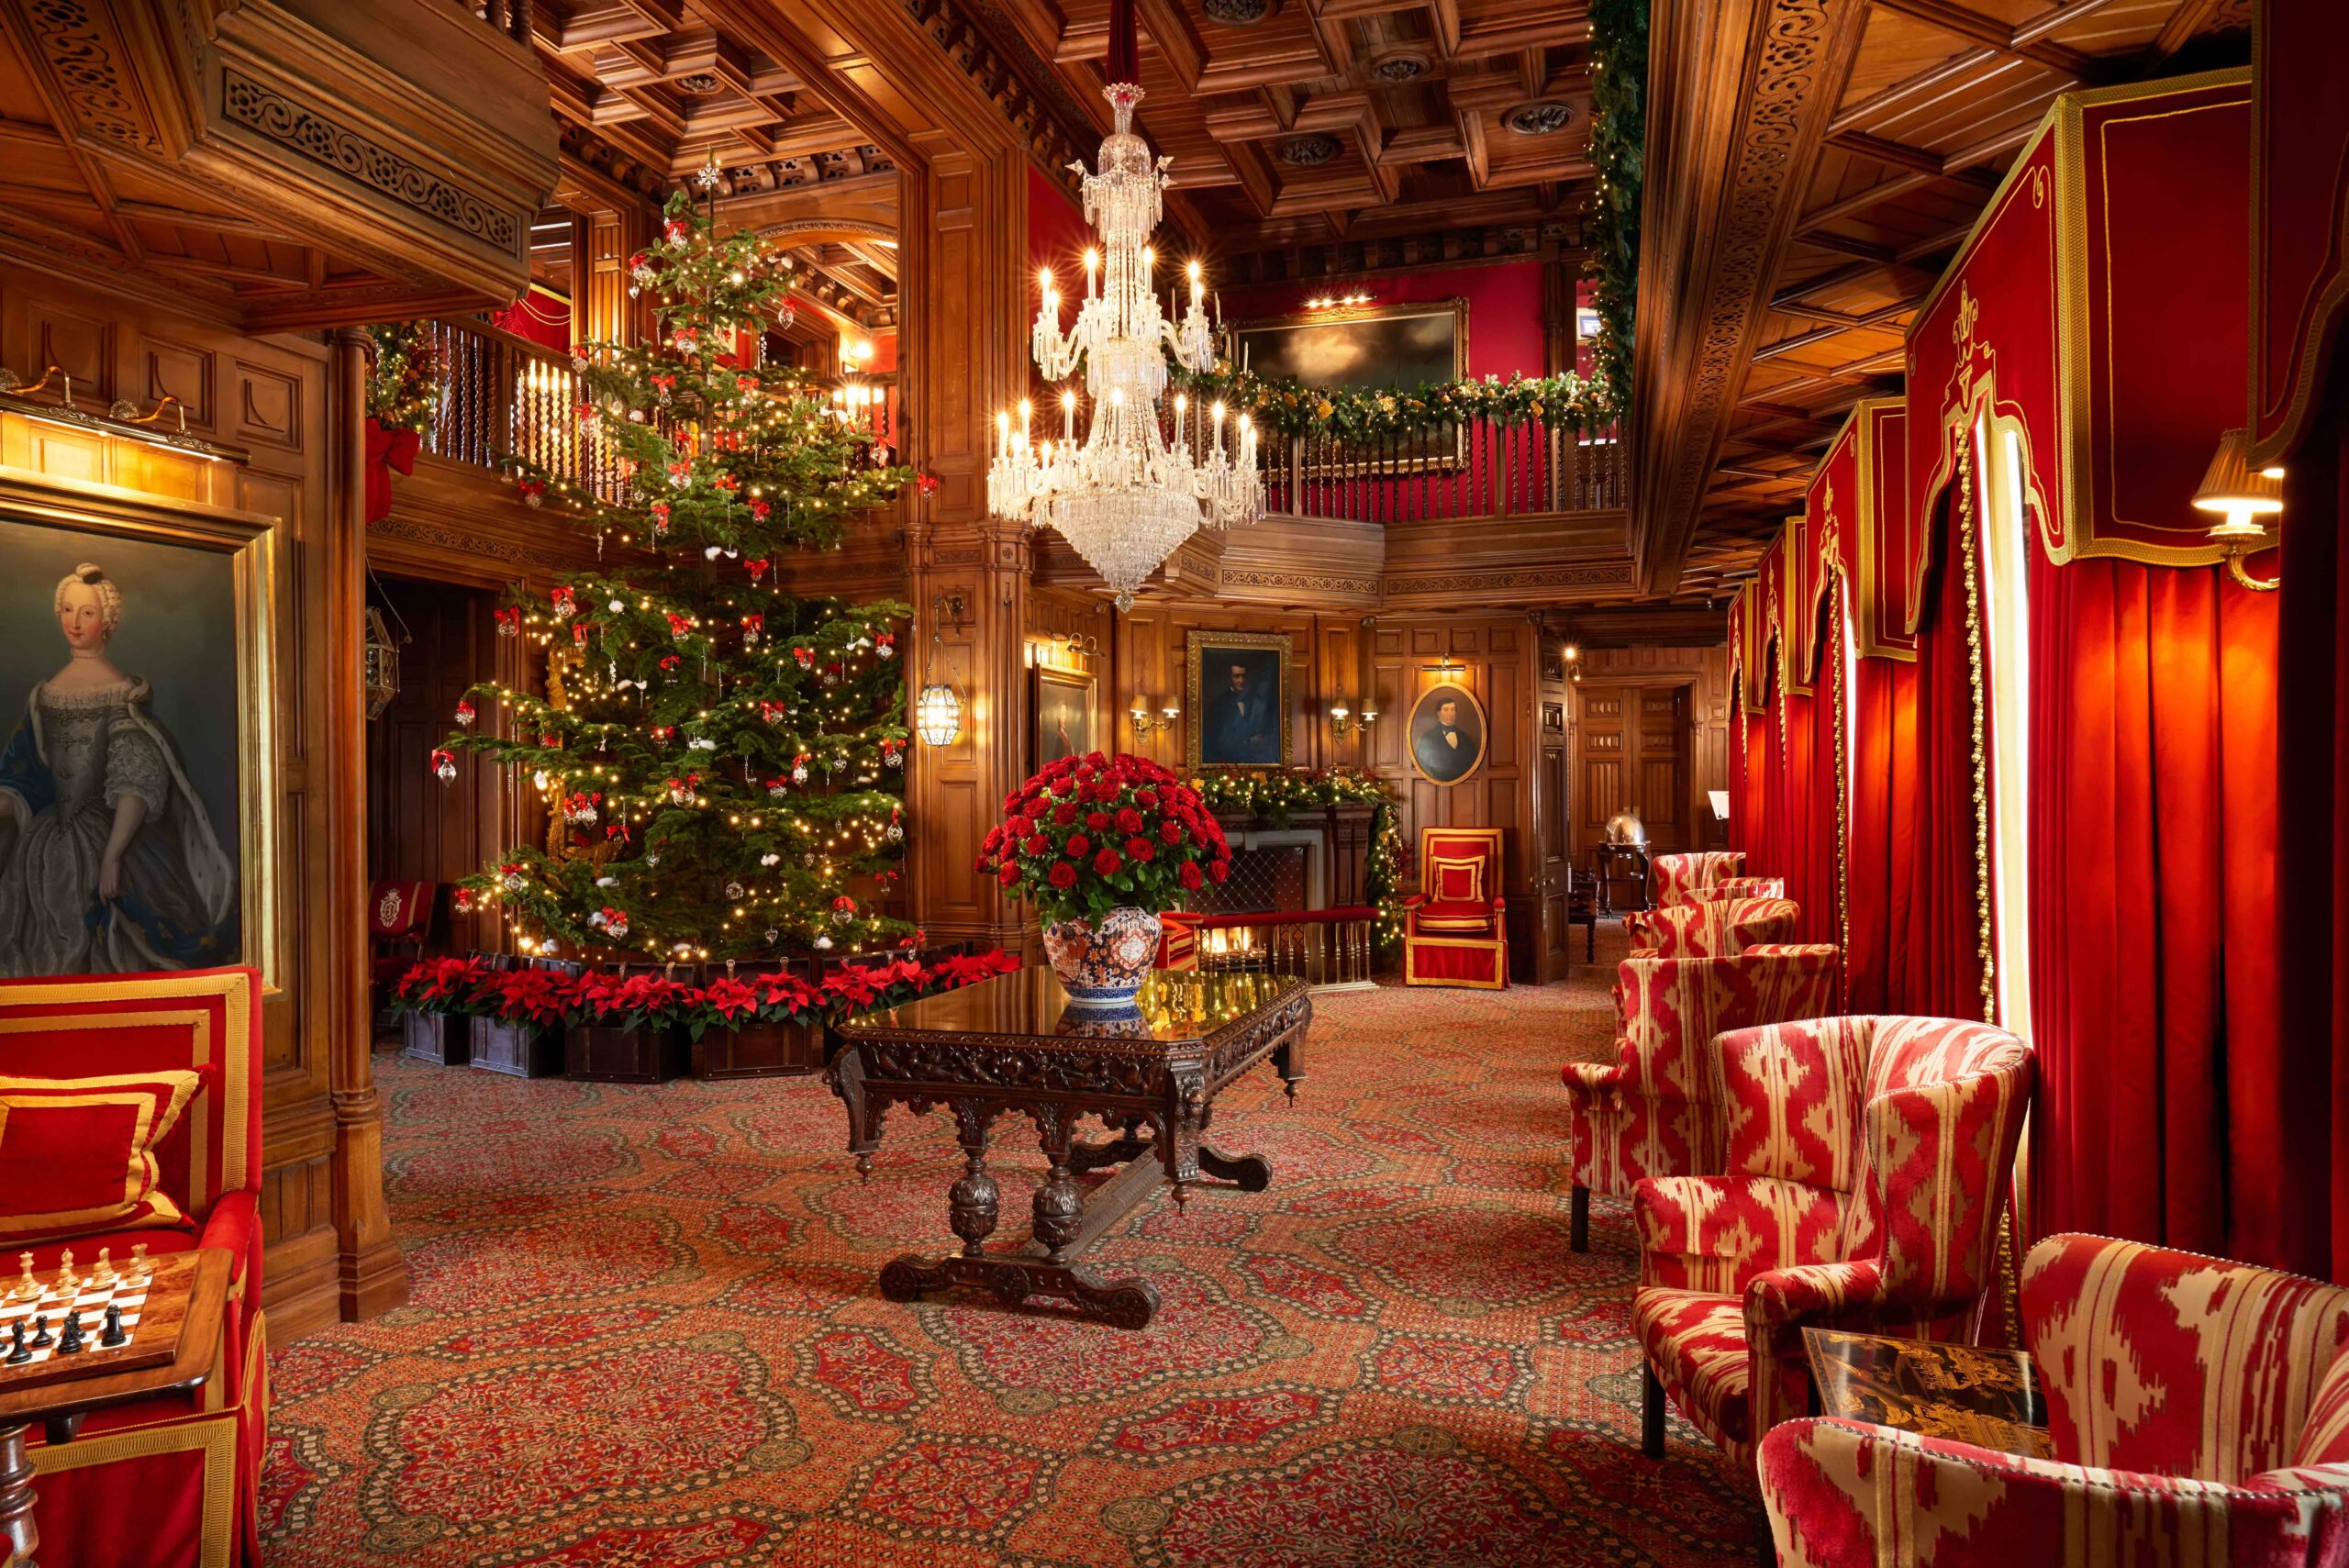 Grand room at Ashford Castle decorated for the holidays.